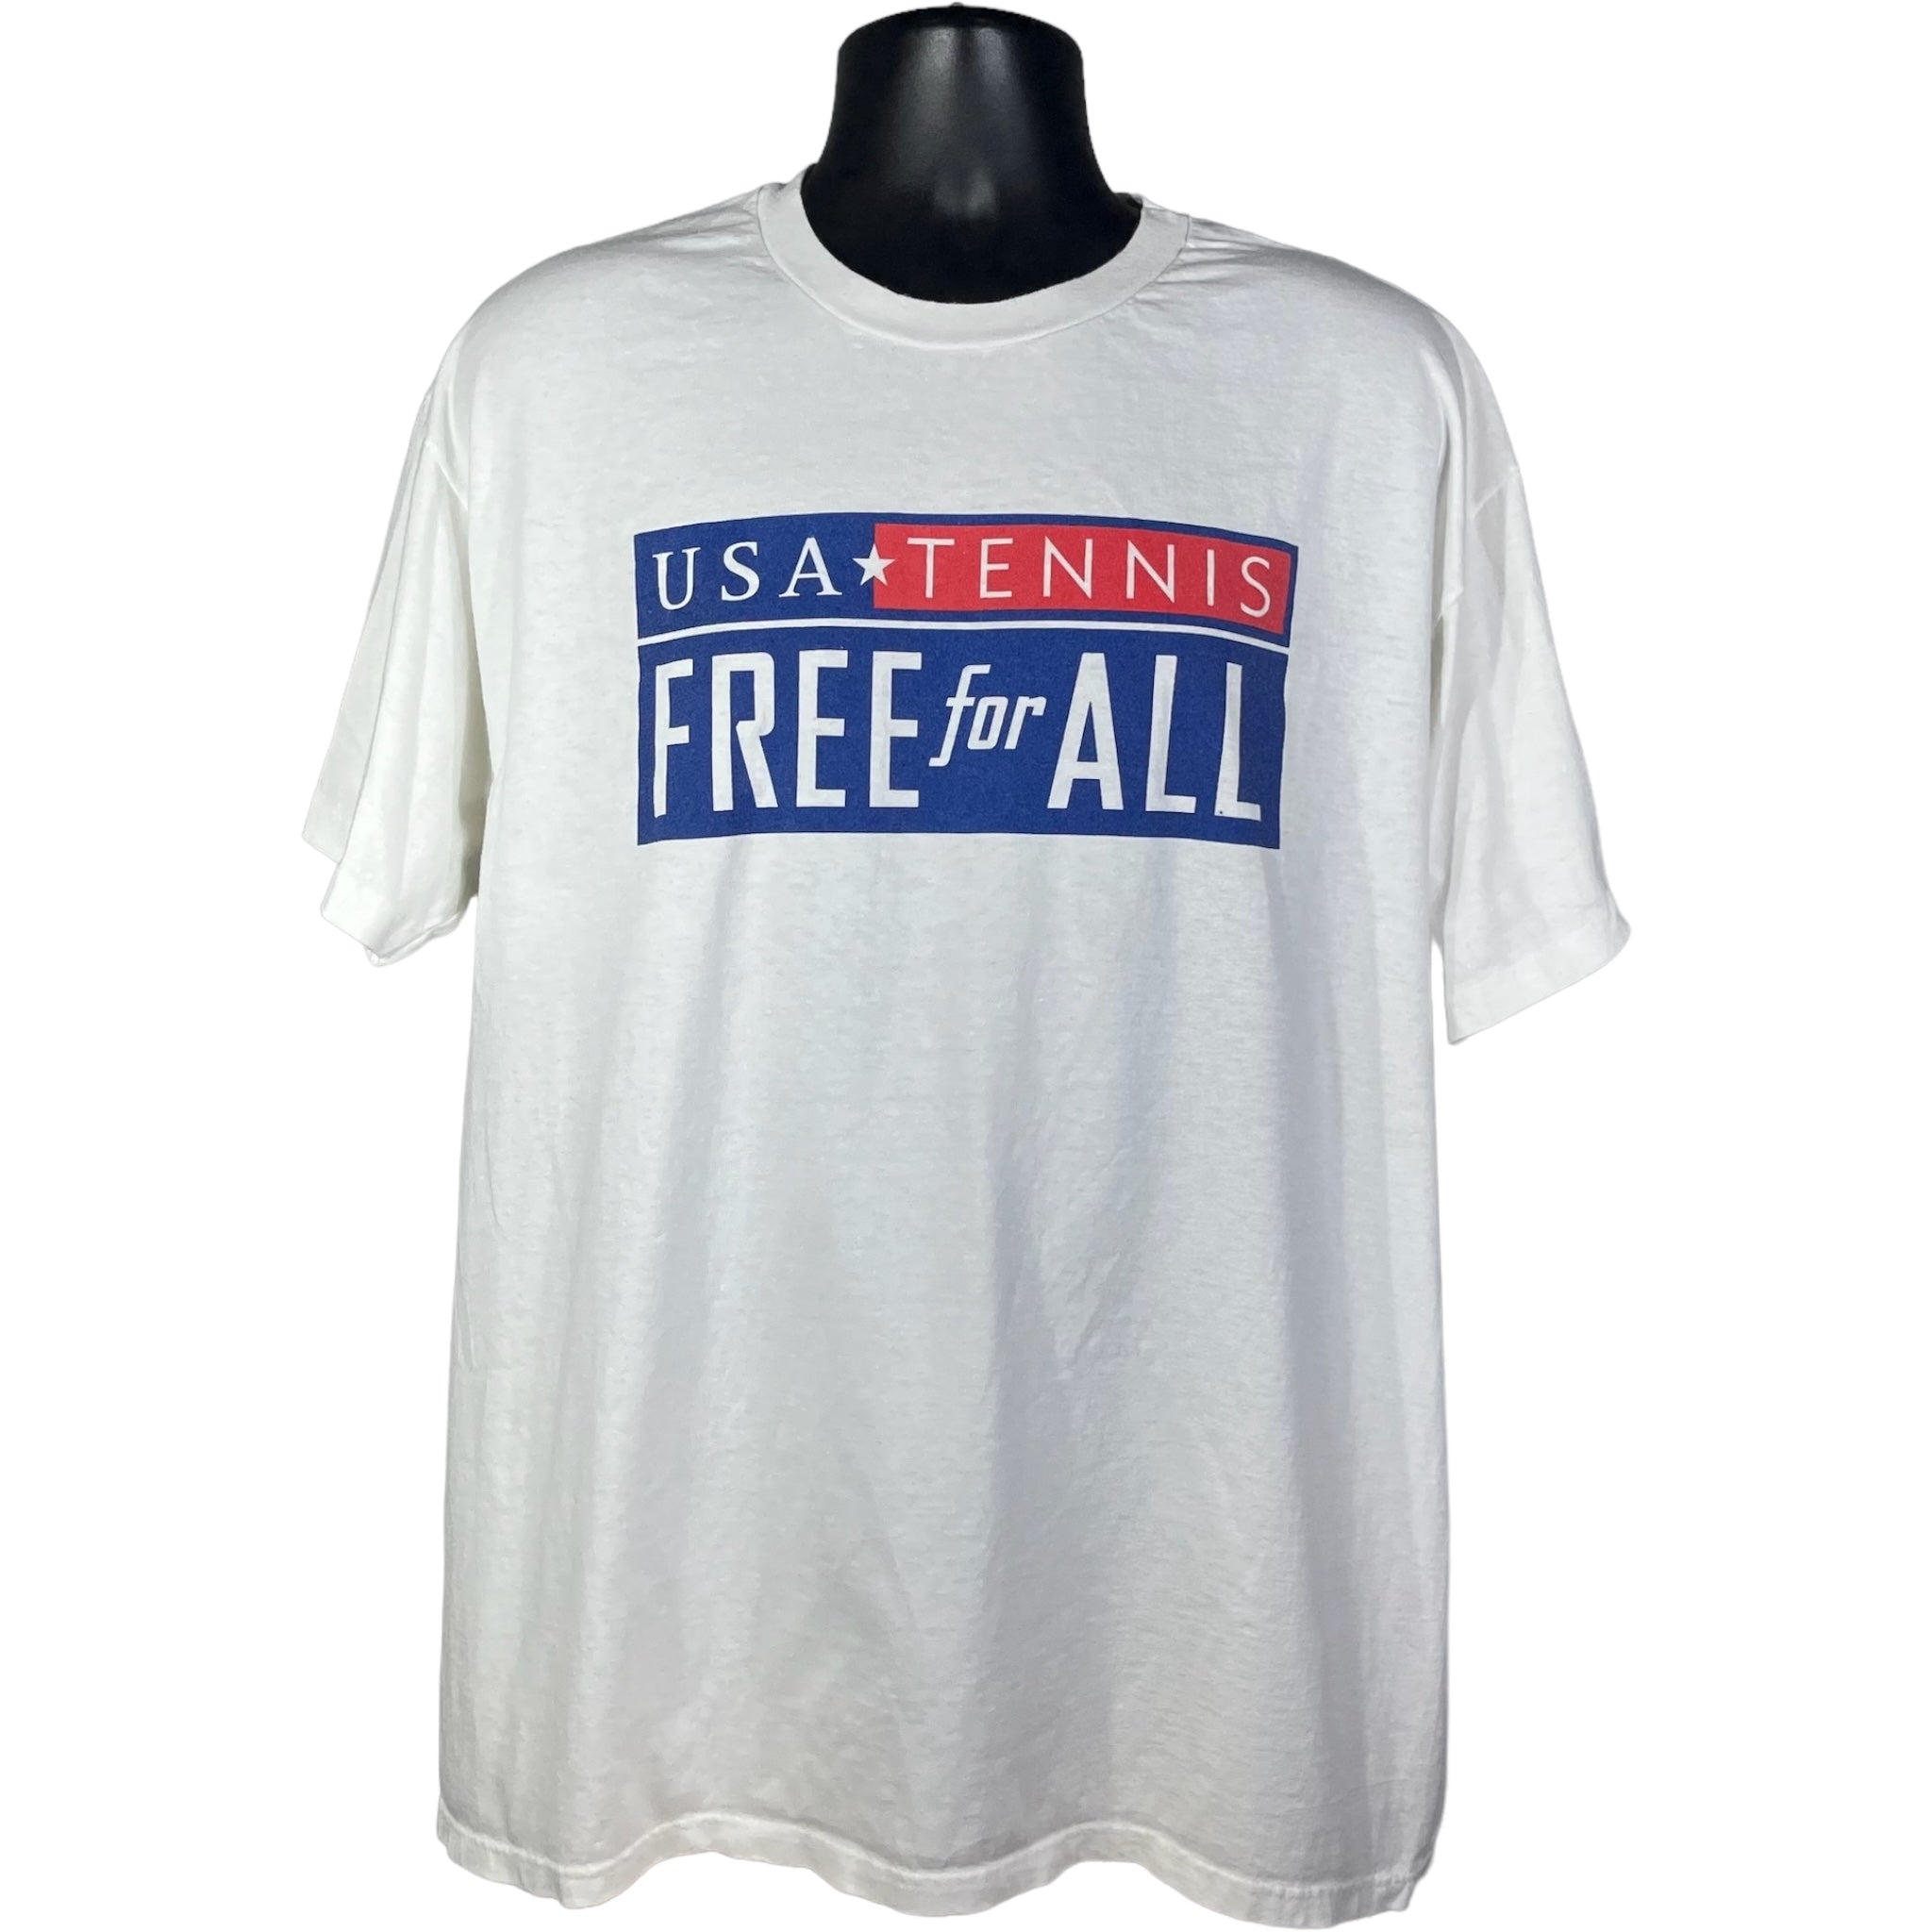 Vintage USA Tennis "Free For All" Spellout Tee 90s